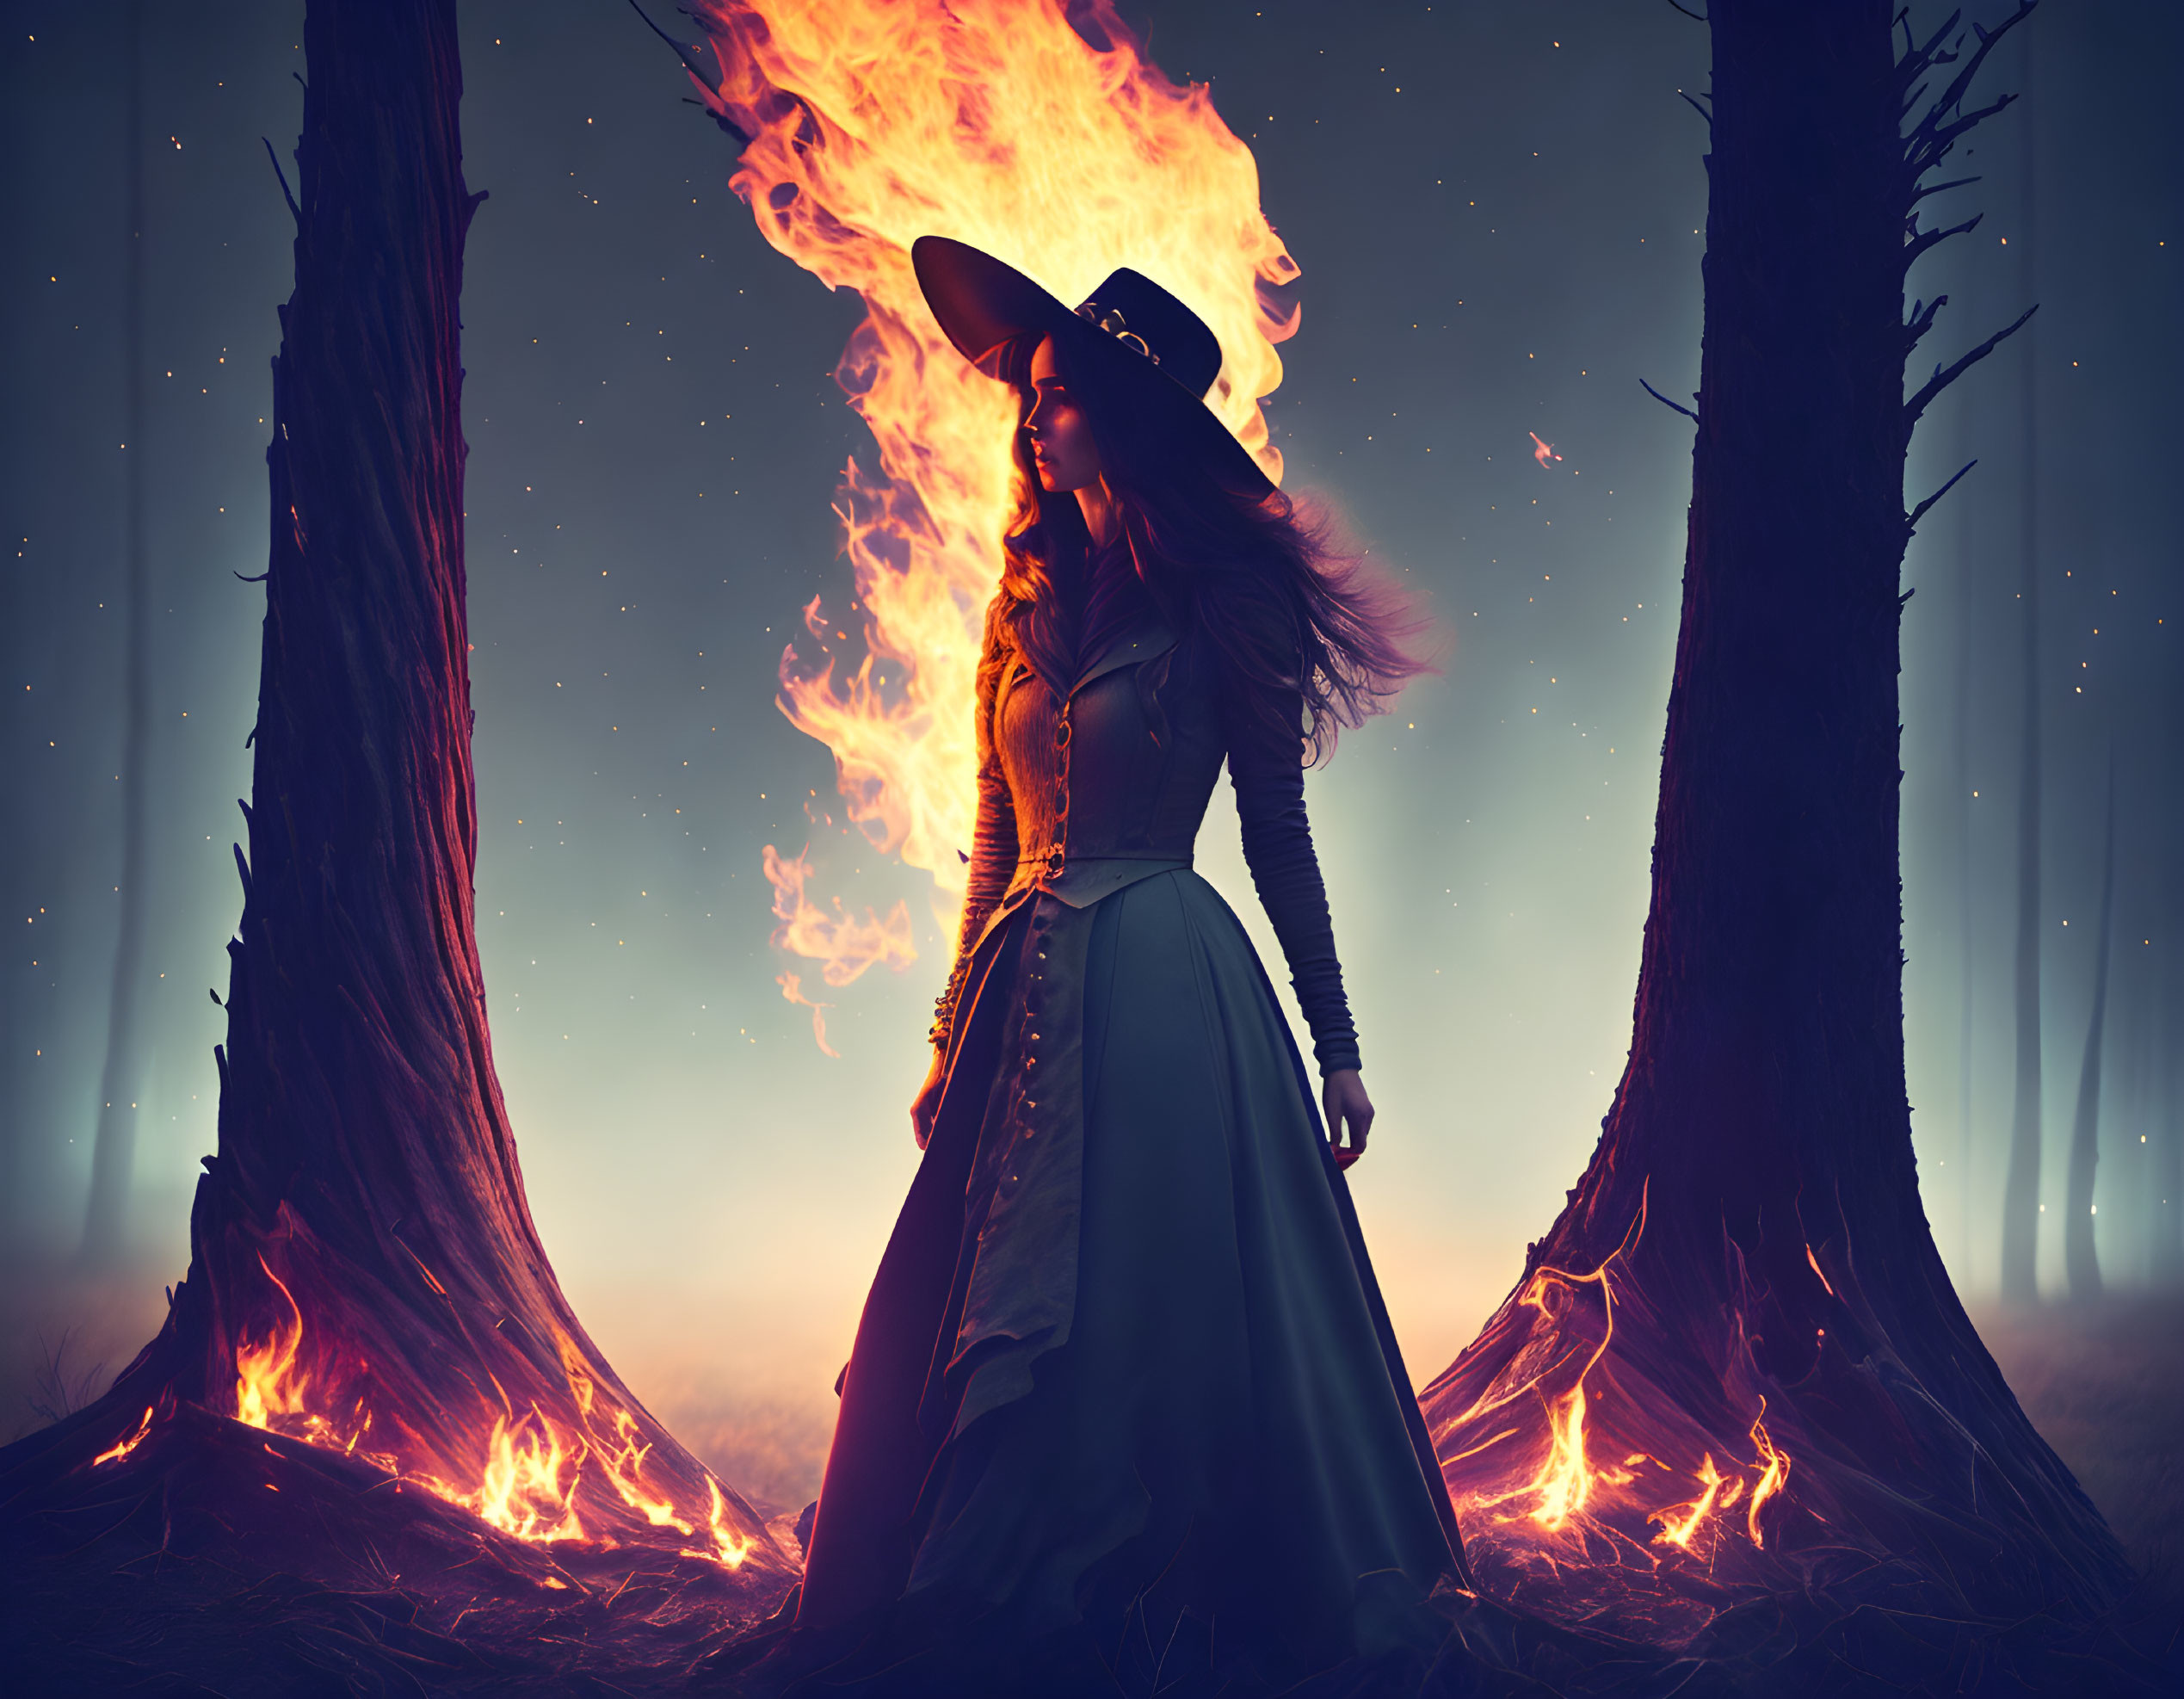 Person in witch-like costume surrounded by mysterious fire in dark forest